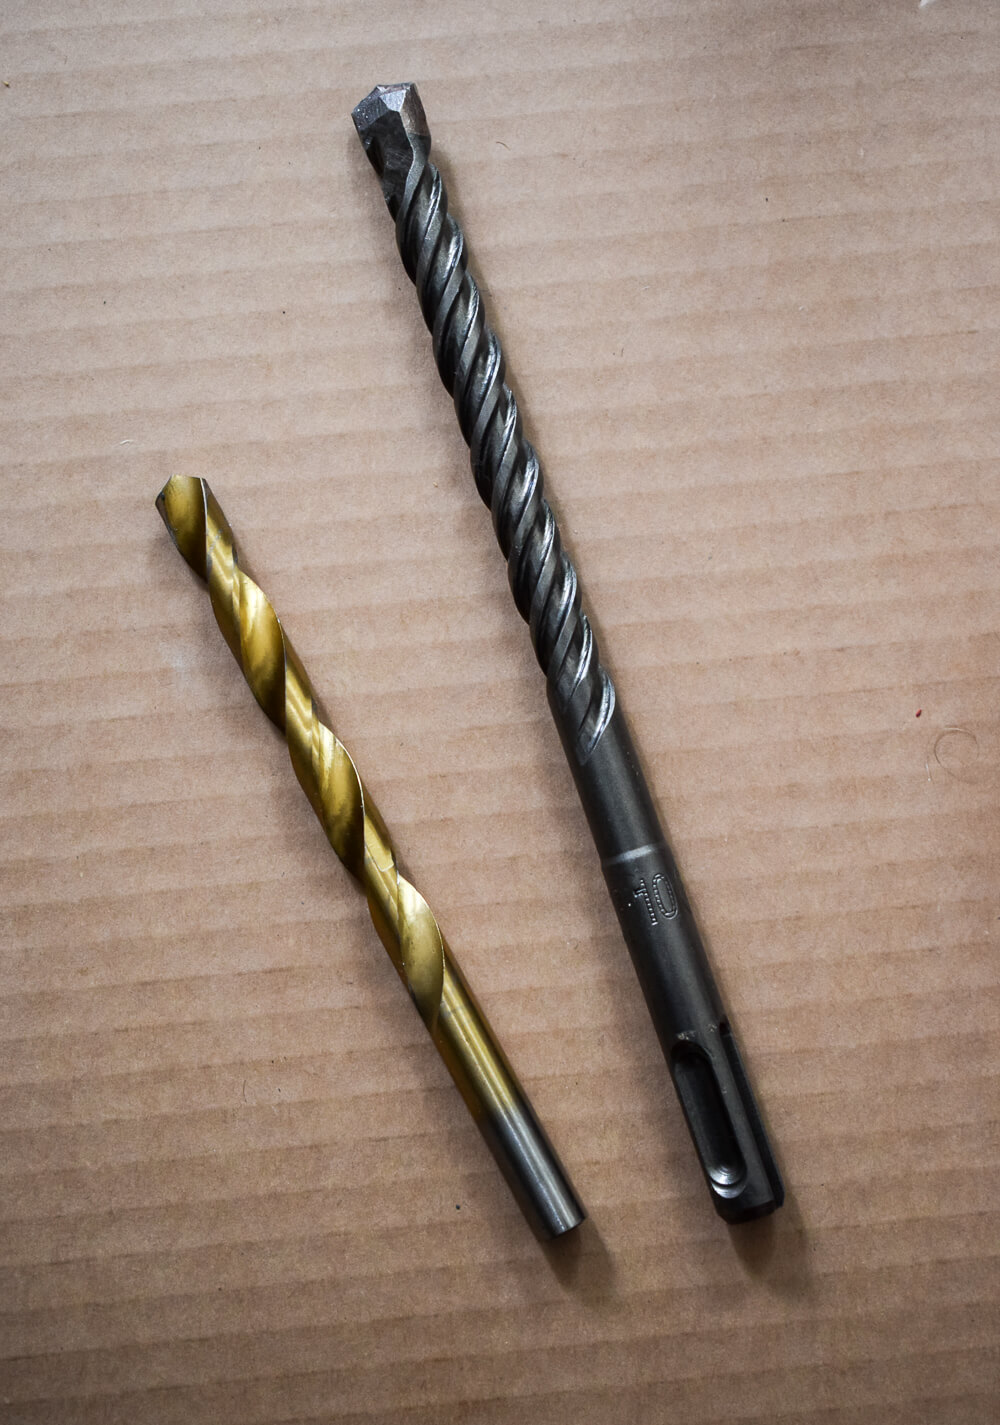 8mm and 10mm drill bit